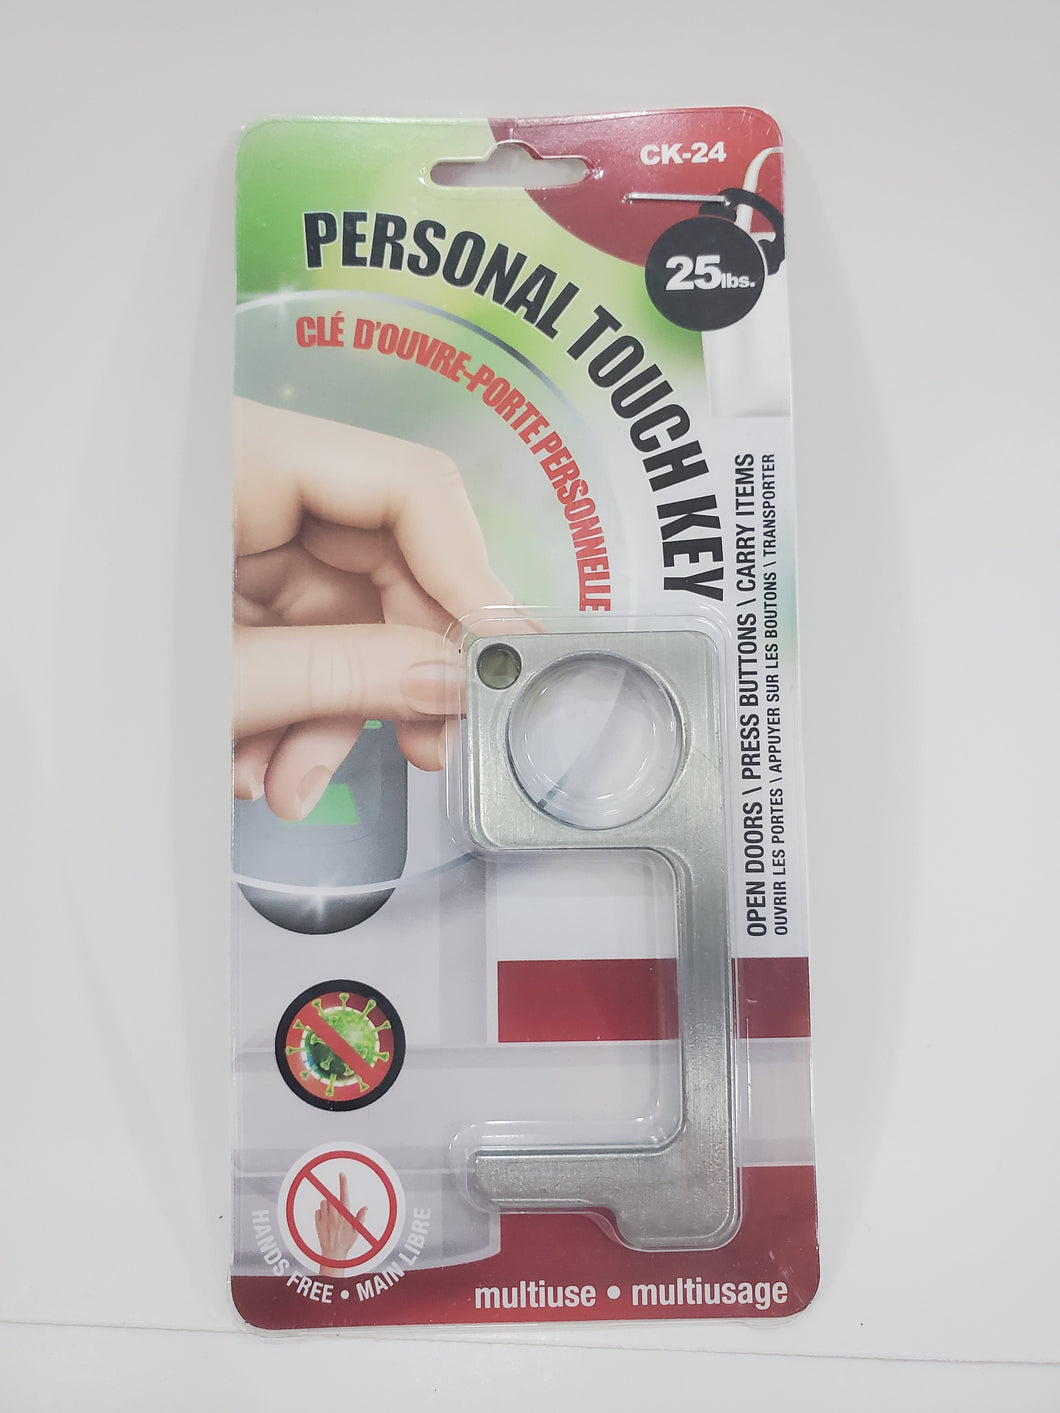 Personal Germ Free Touch Key - CK-24